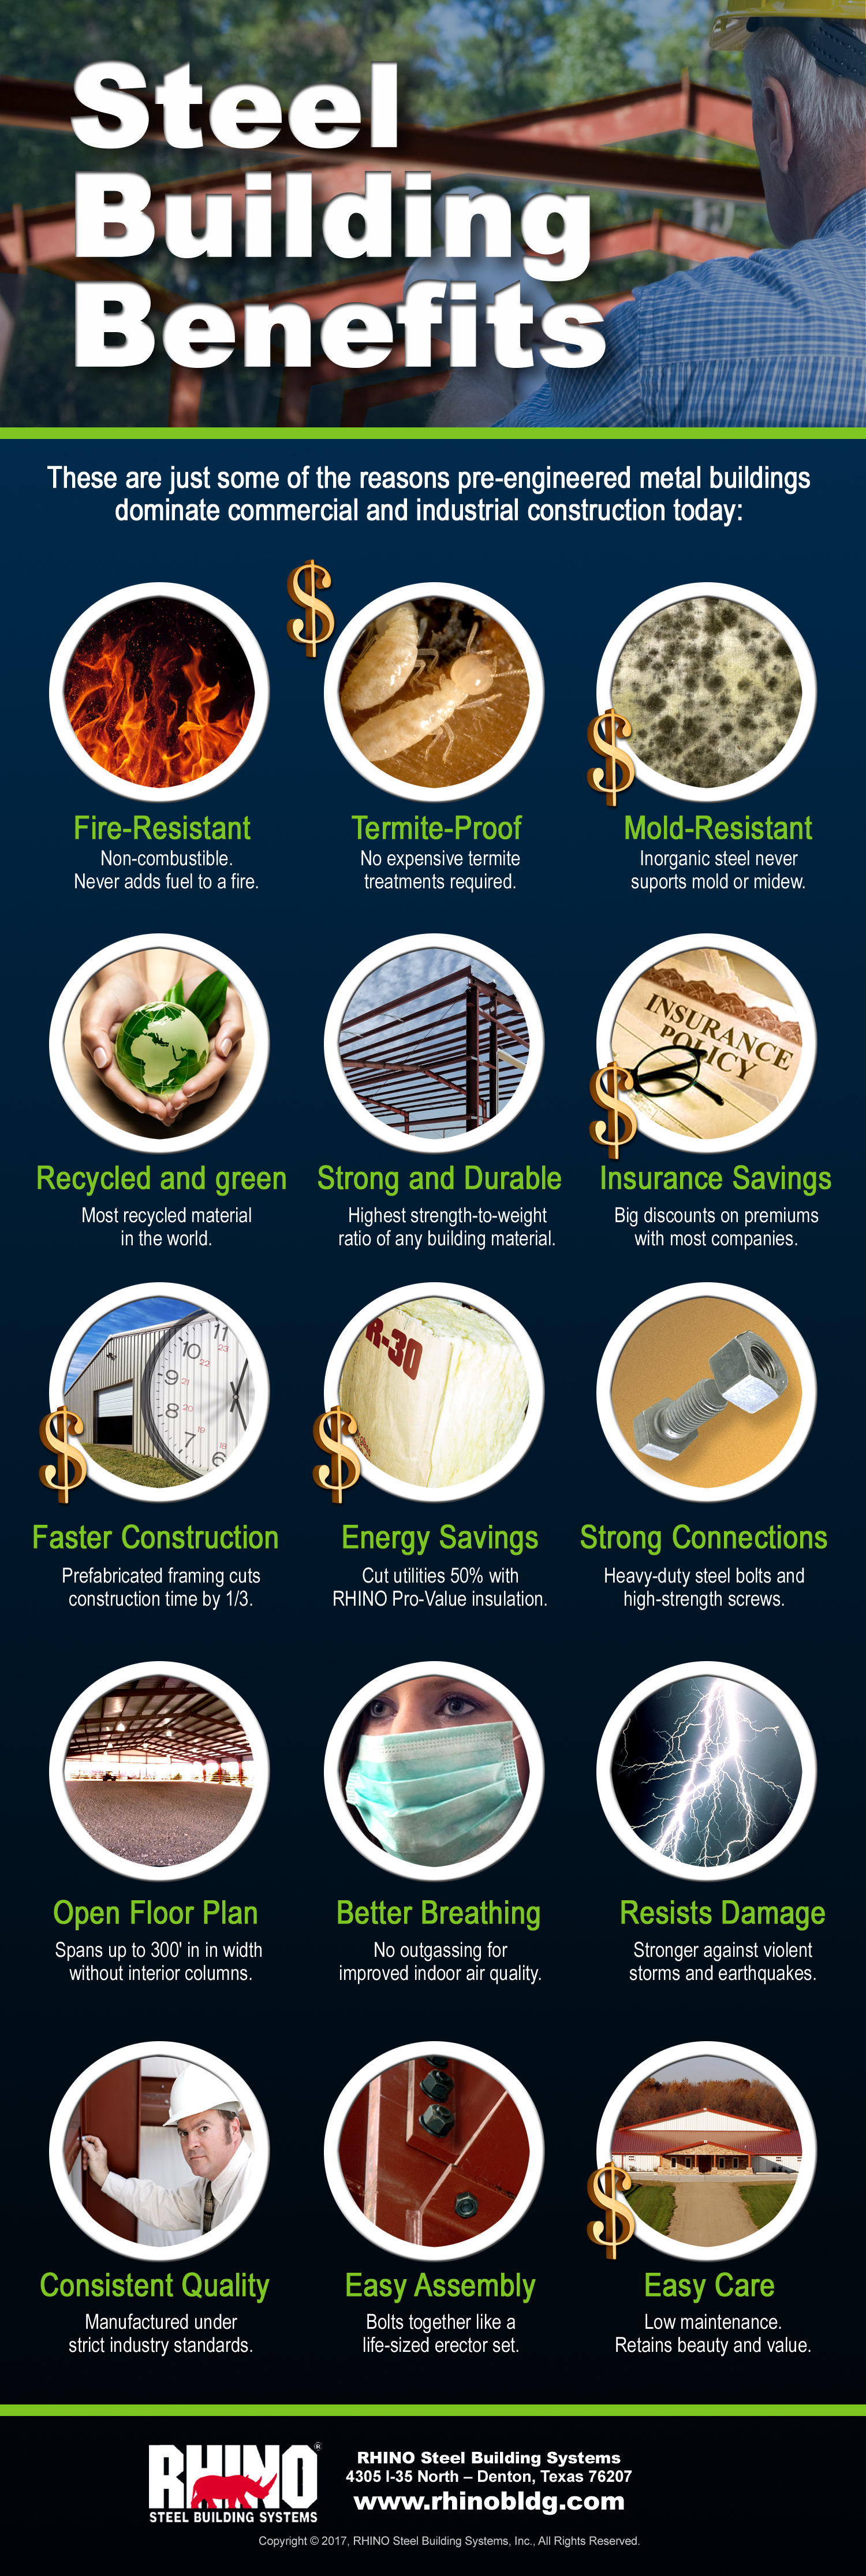 Infographic 15 steel building benefits for steel warehouses and distribution centers.